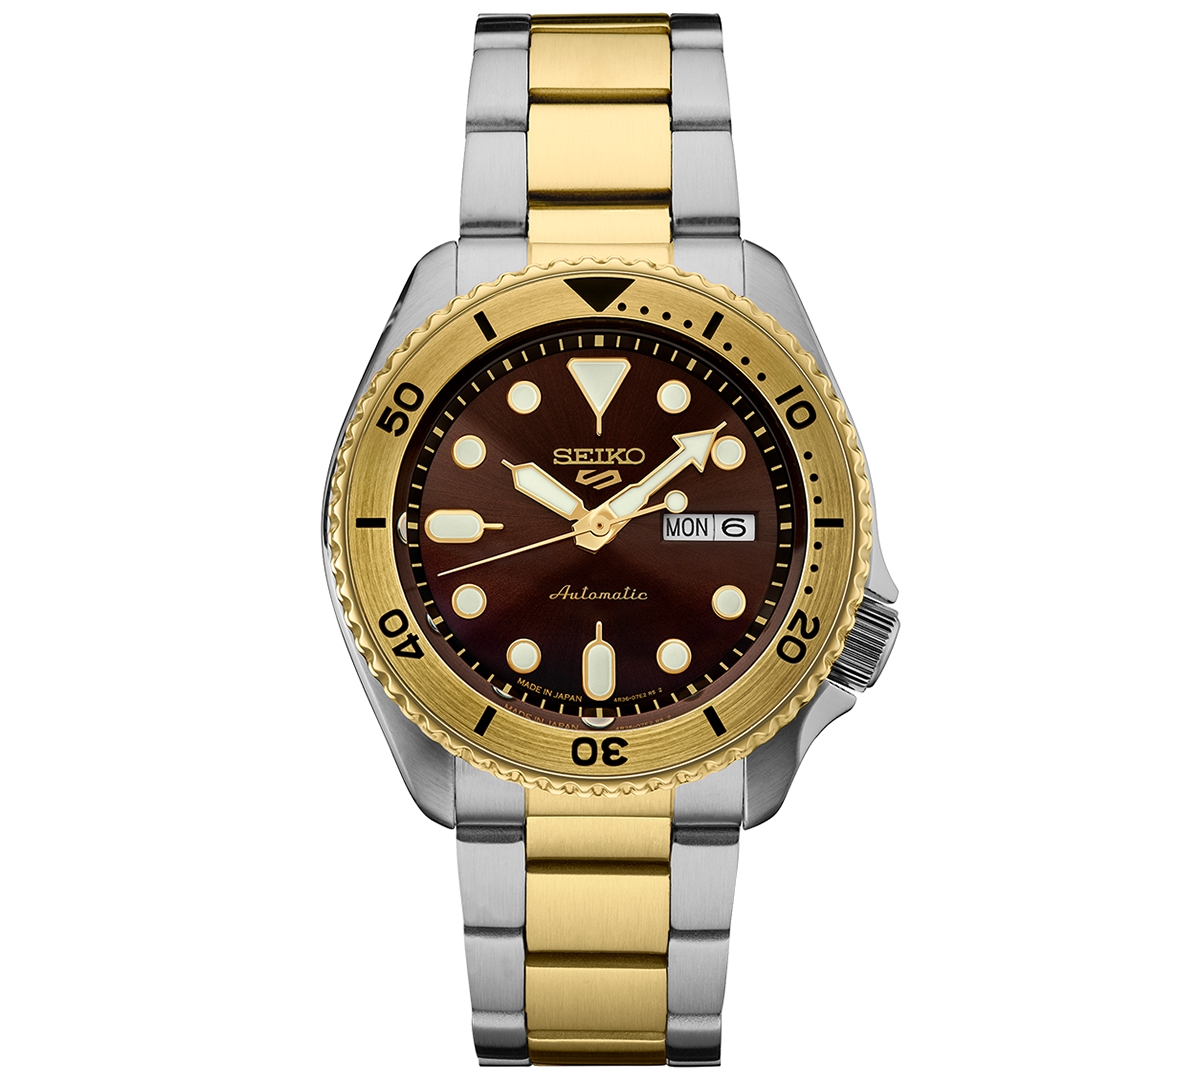 Seiko Men's Automatic 5 Sports Two-tone Stainless Steel Bracelet Watch 43mm In Brown